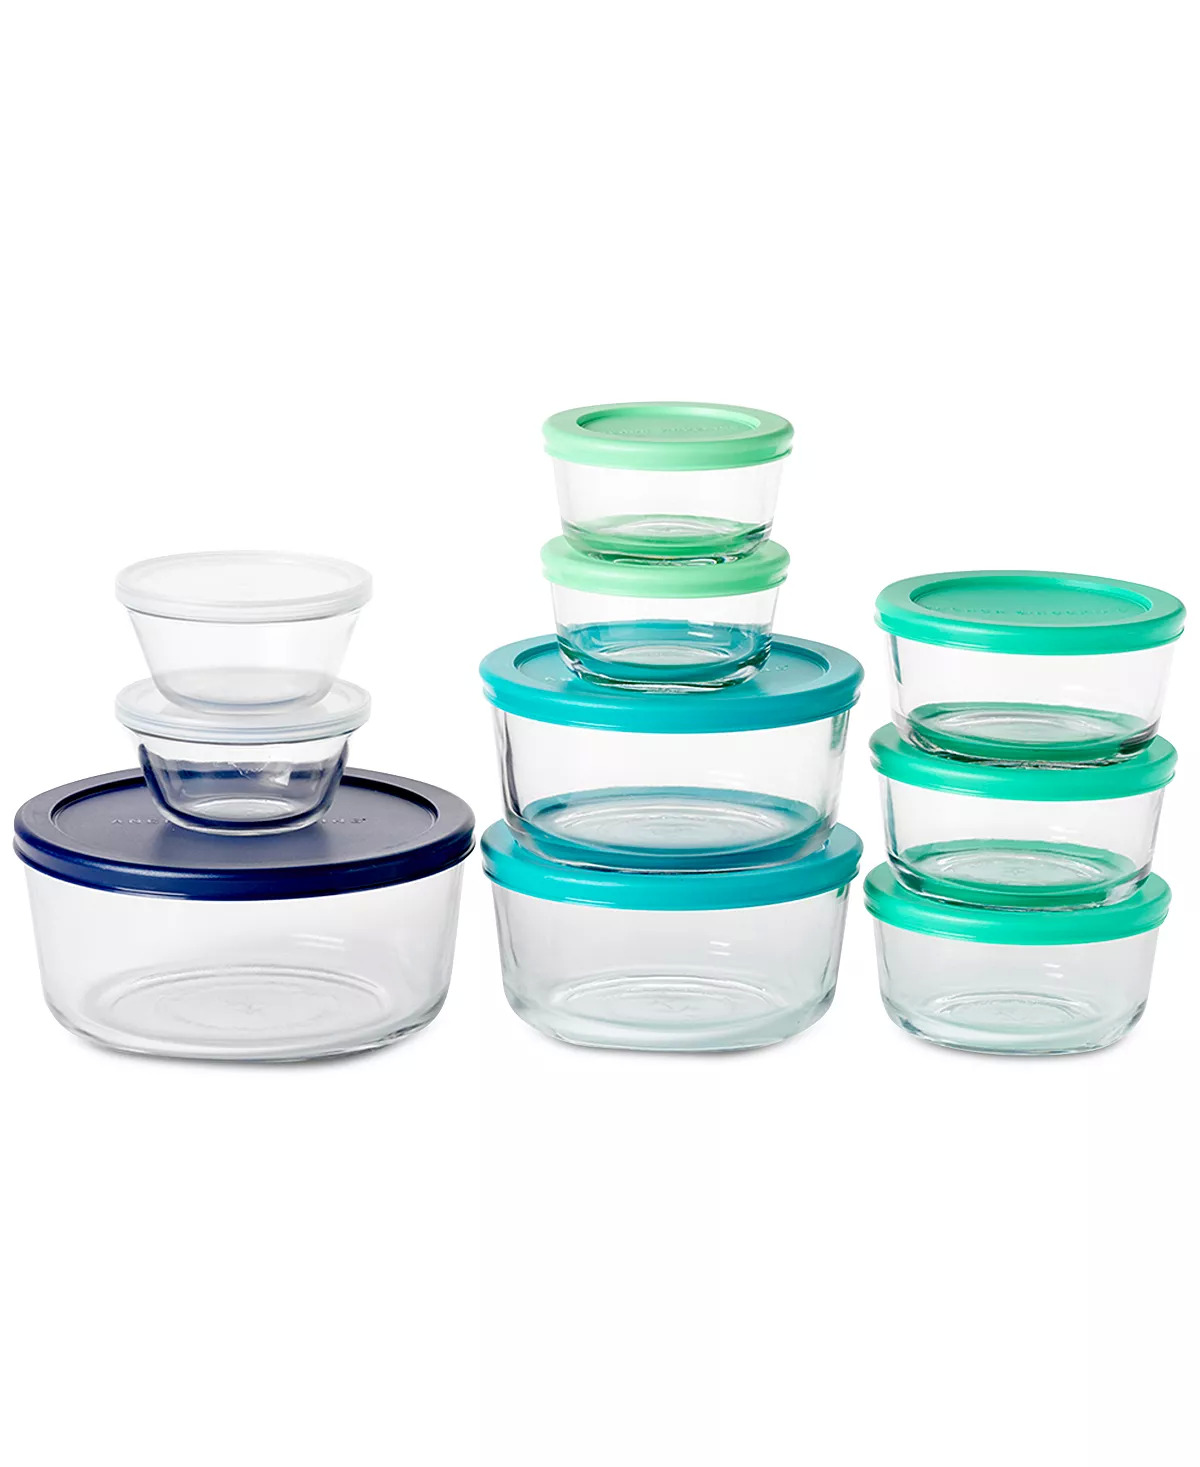 20-Piece Anchor Hocking Glass Food Storage Set w/ SnugFit Lids $19.99 + Free Store Pickup at Macy's or F/S on Orders $25+